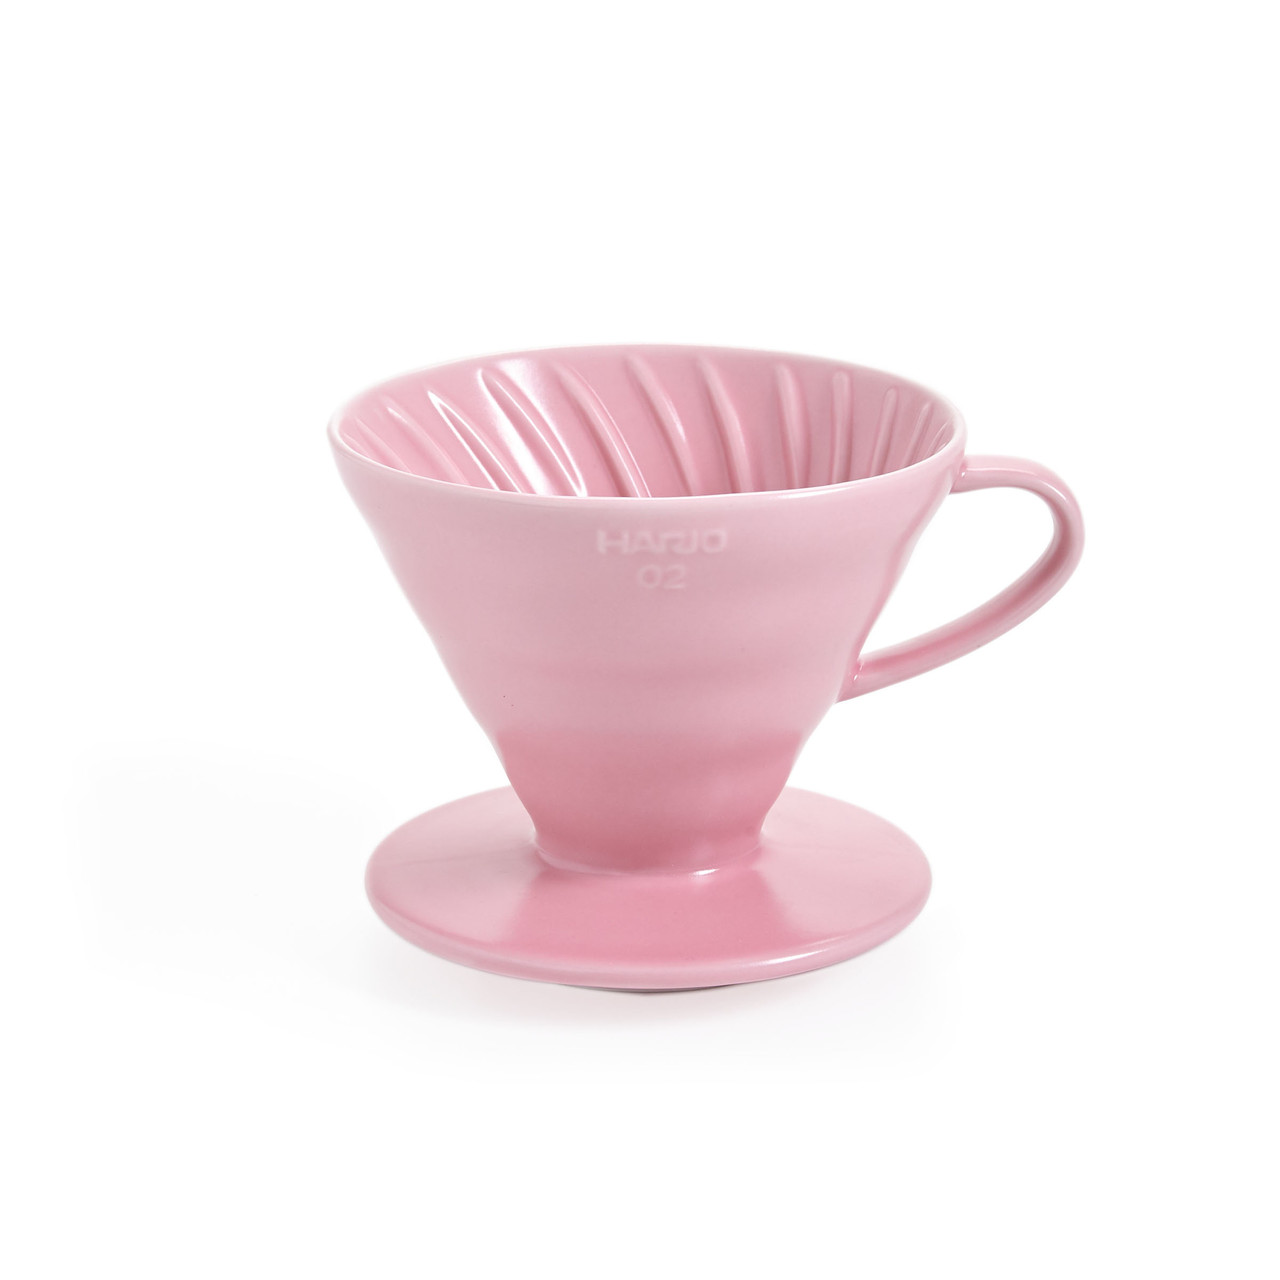 V60 Drip Scale Pink – Hario USA